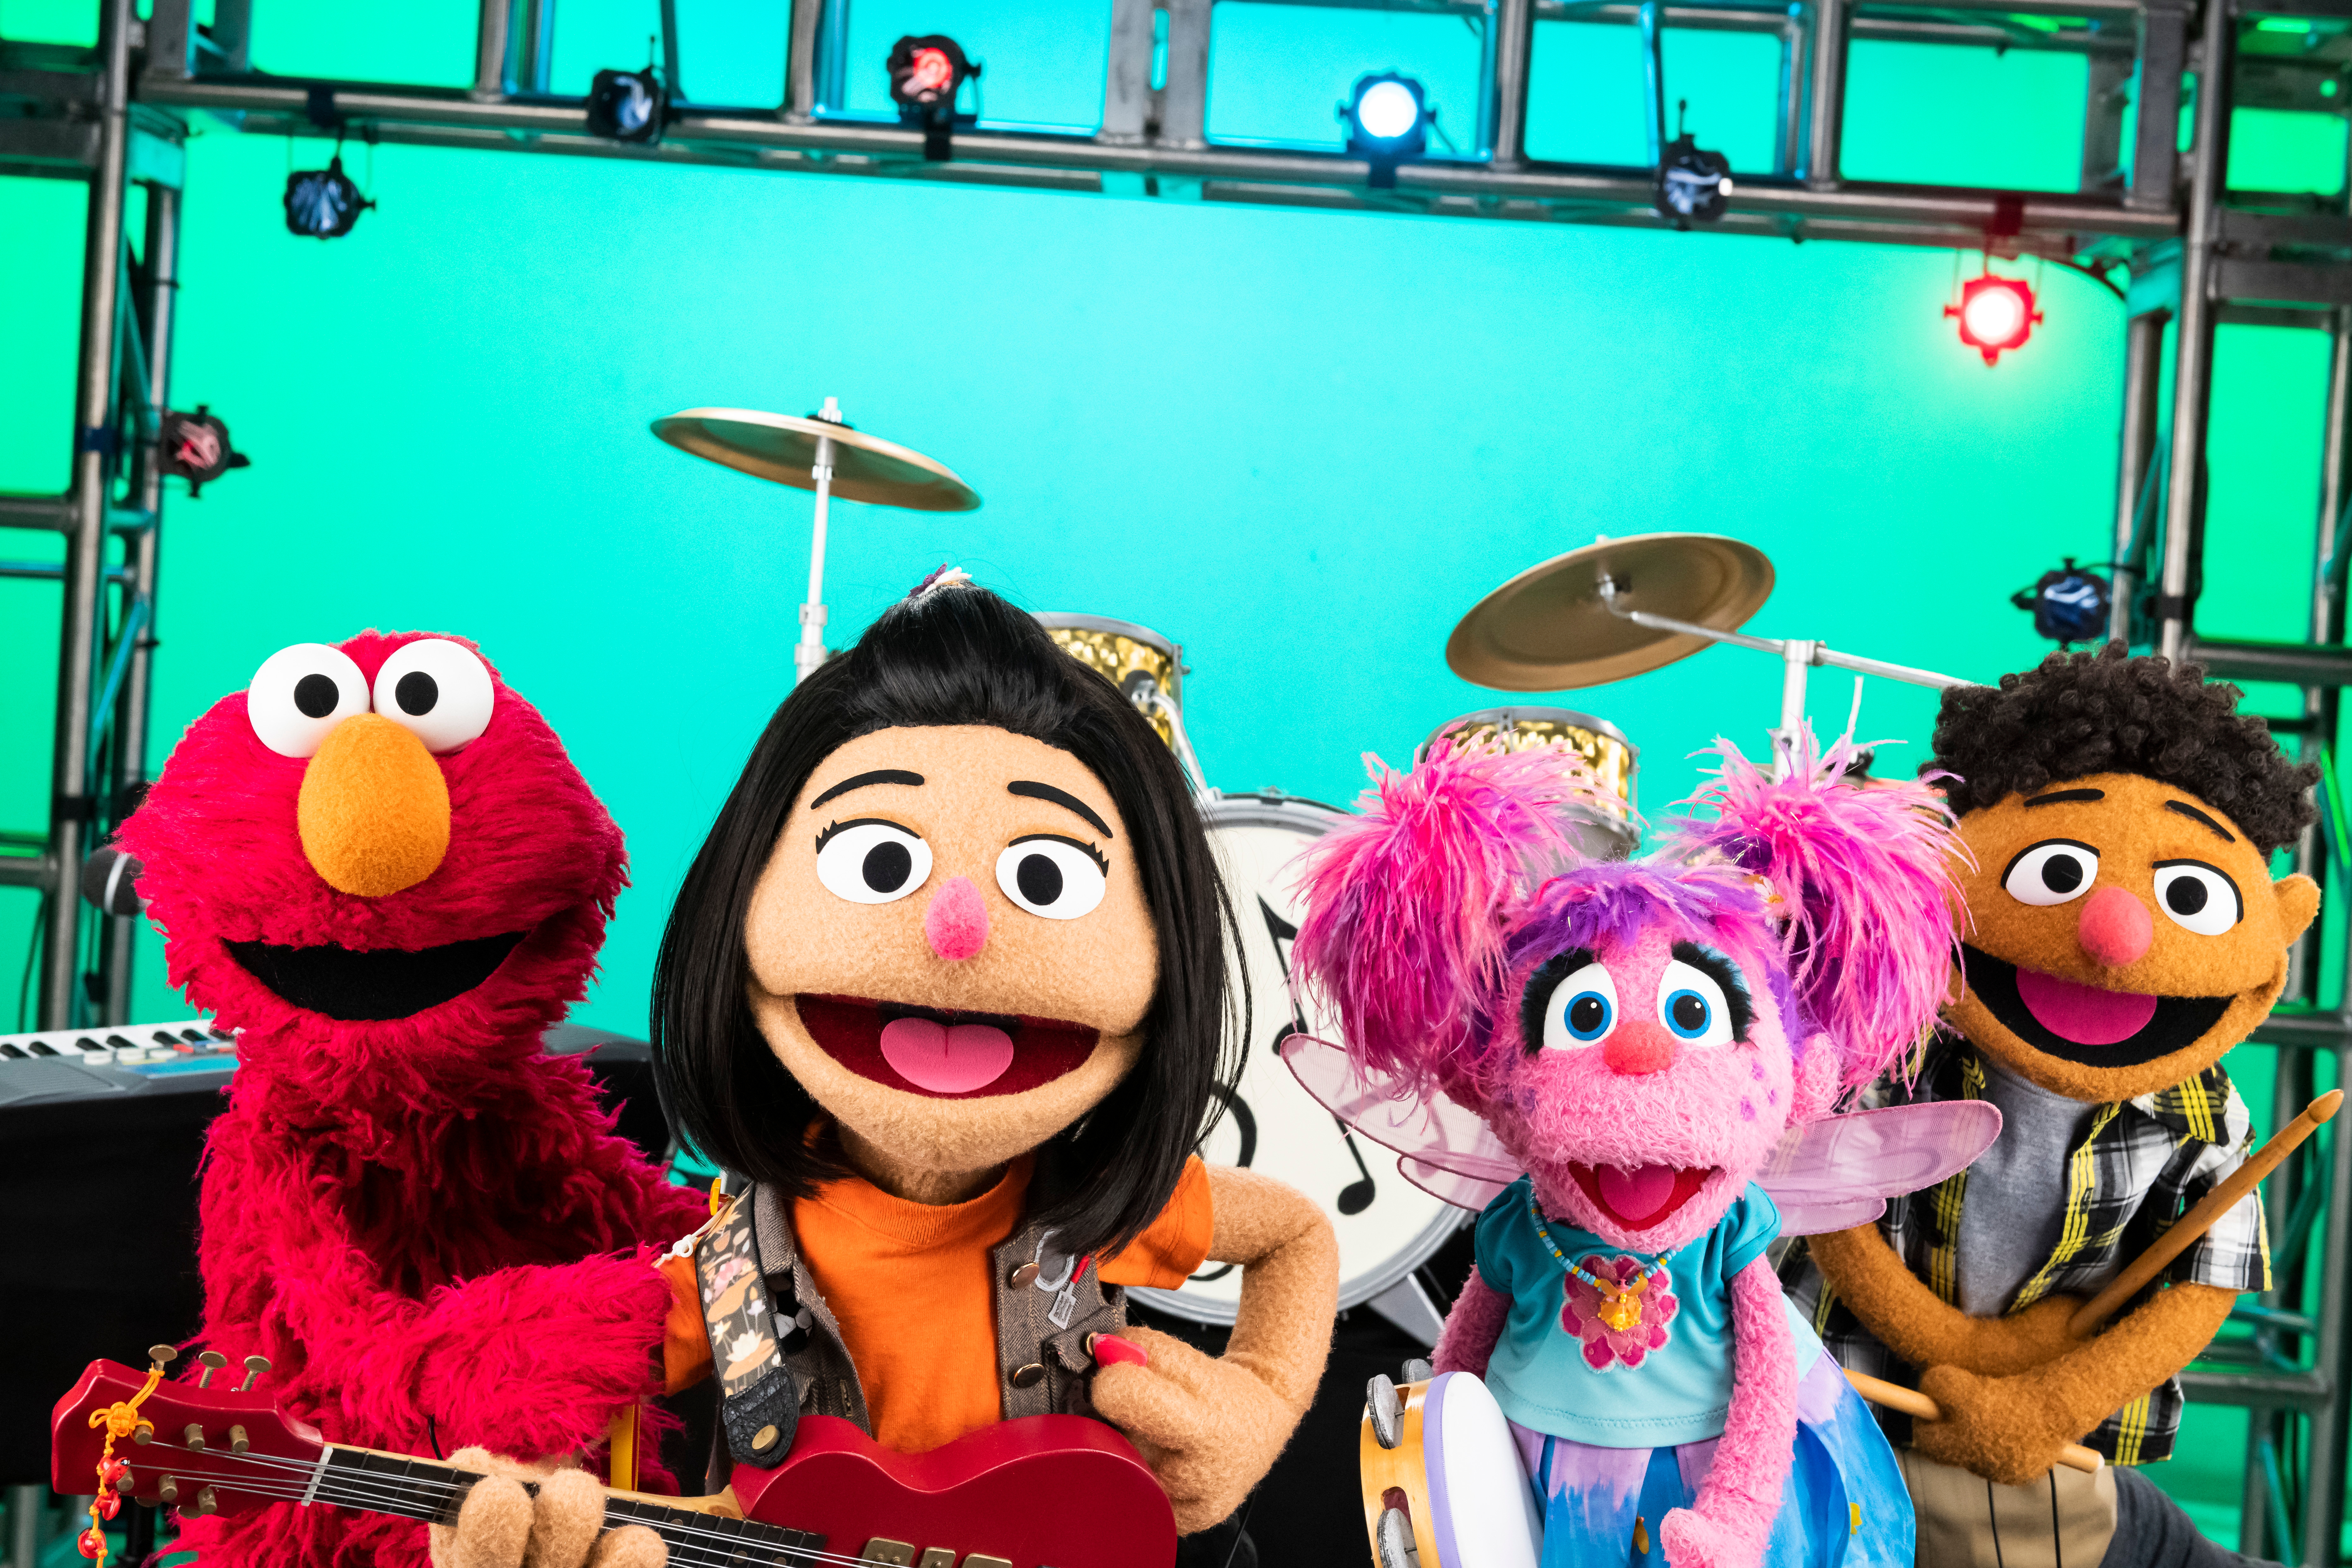 Let Ernie introduce you to Sesame Street‘s newest resident, Ji-Young